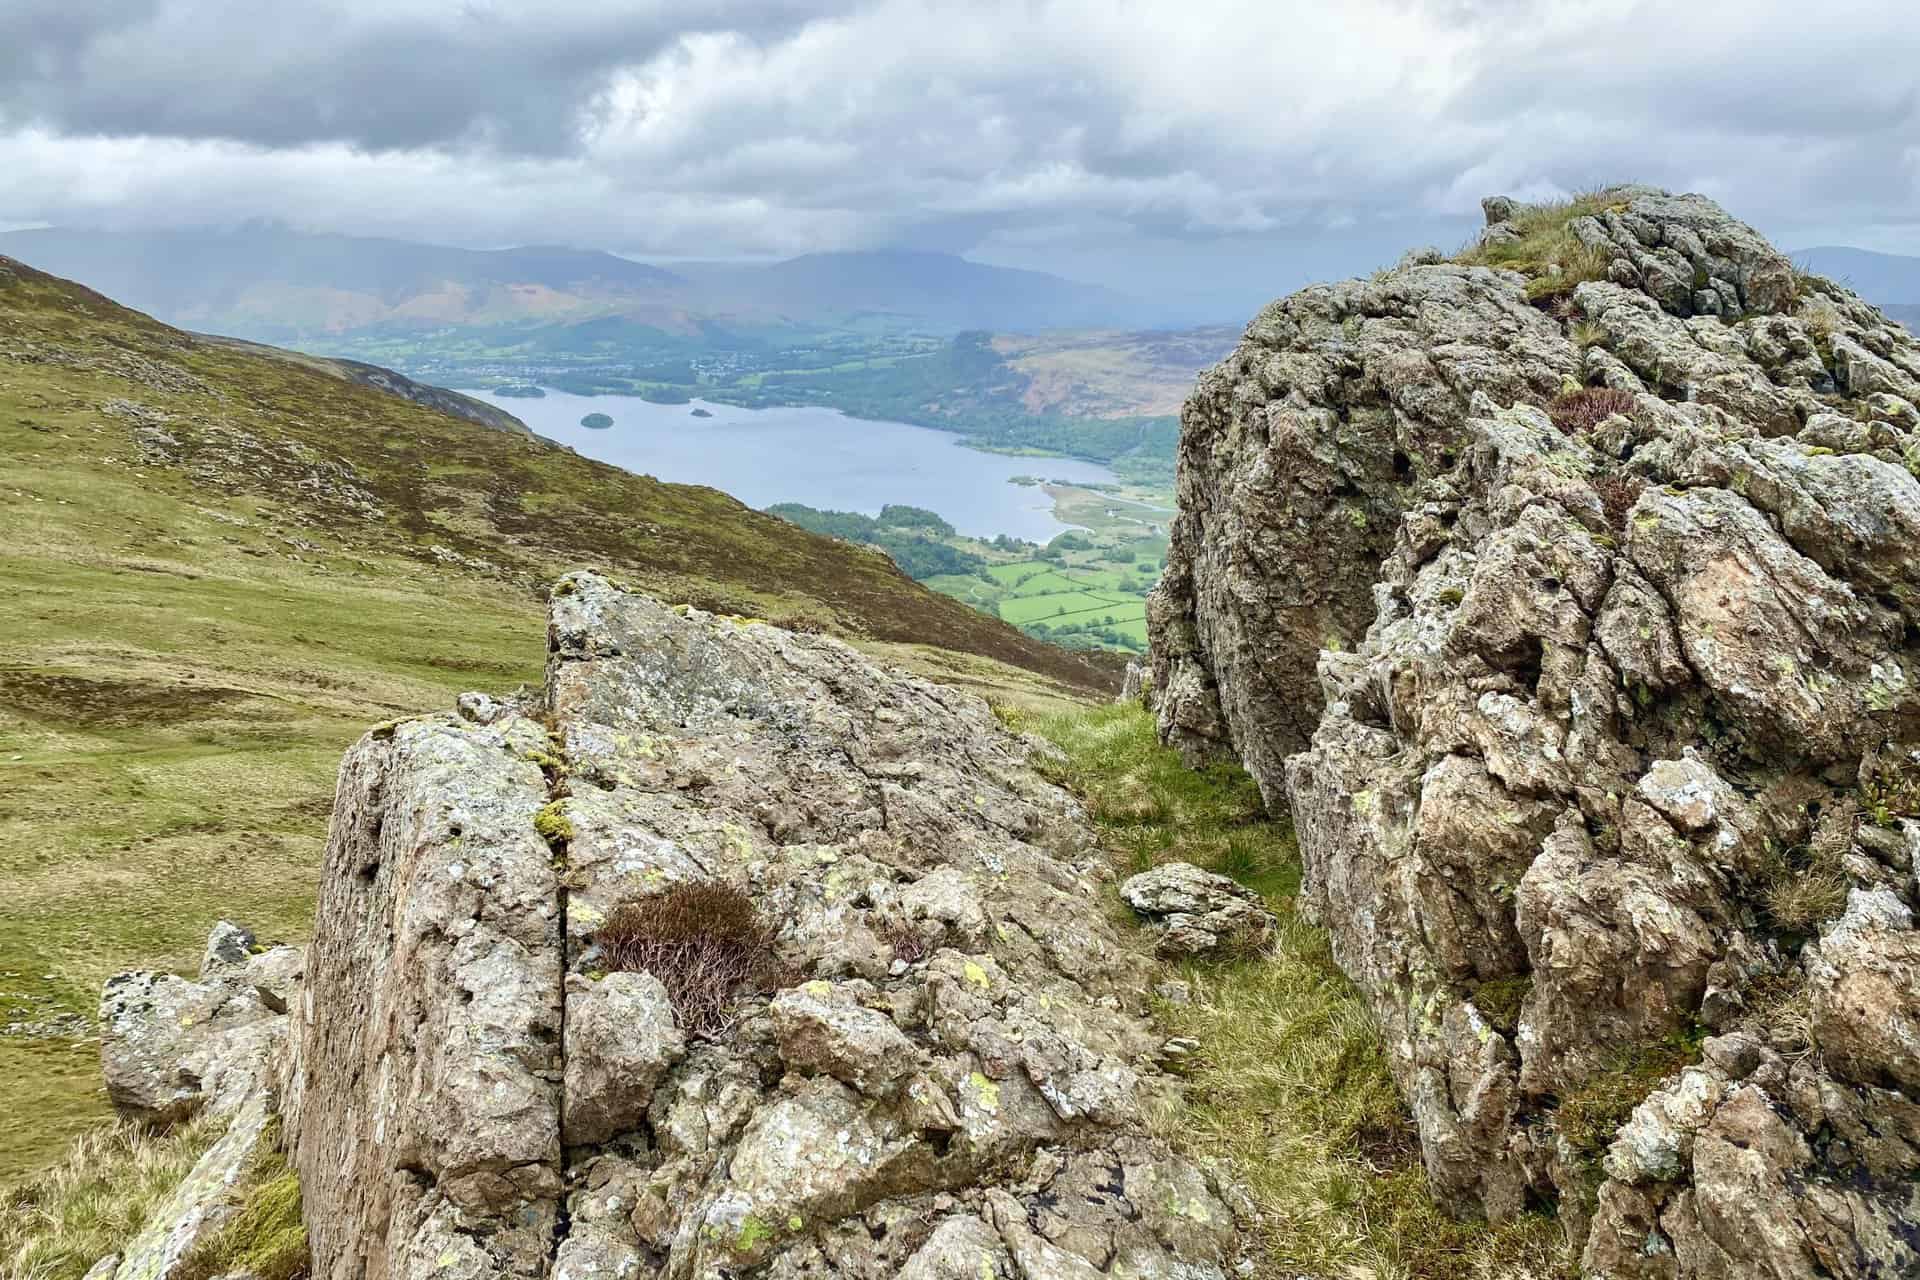 Derwent Water is visible from the footpath across High Spy, but it's worth briefly leaving the path as there are better views from Minum Crag on the eastern slopes of the mountain.